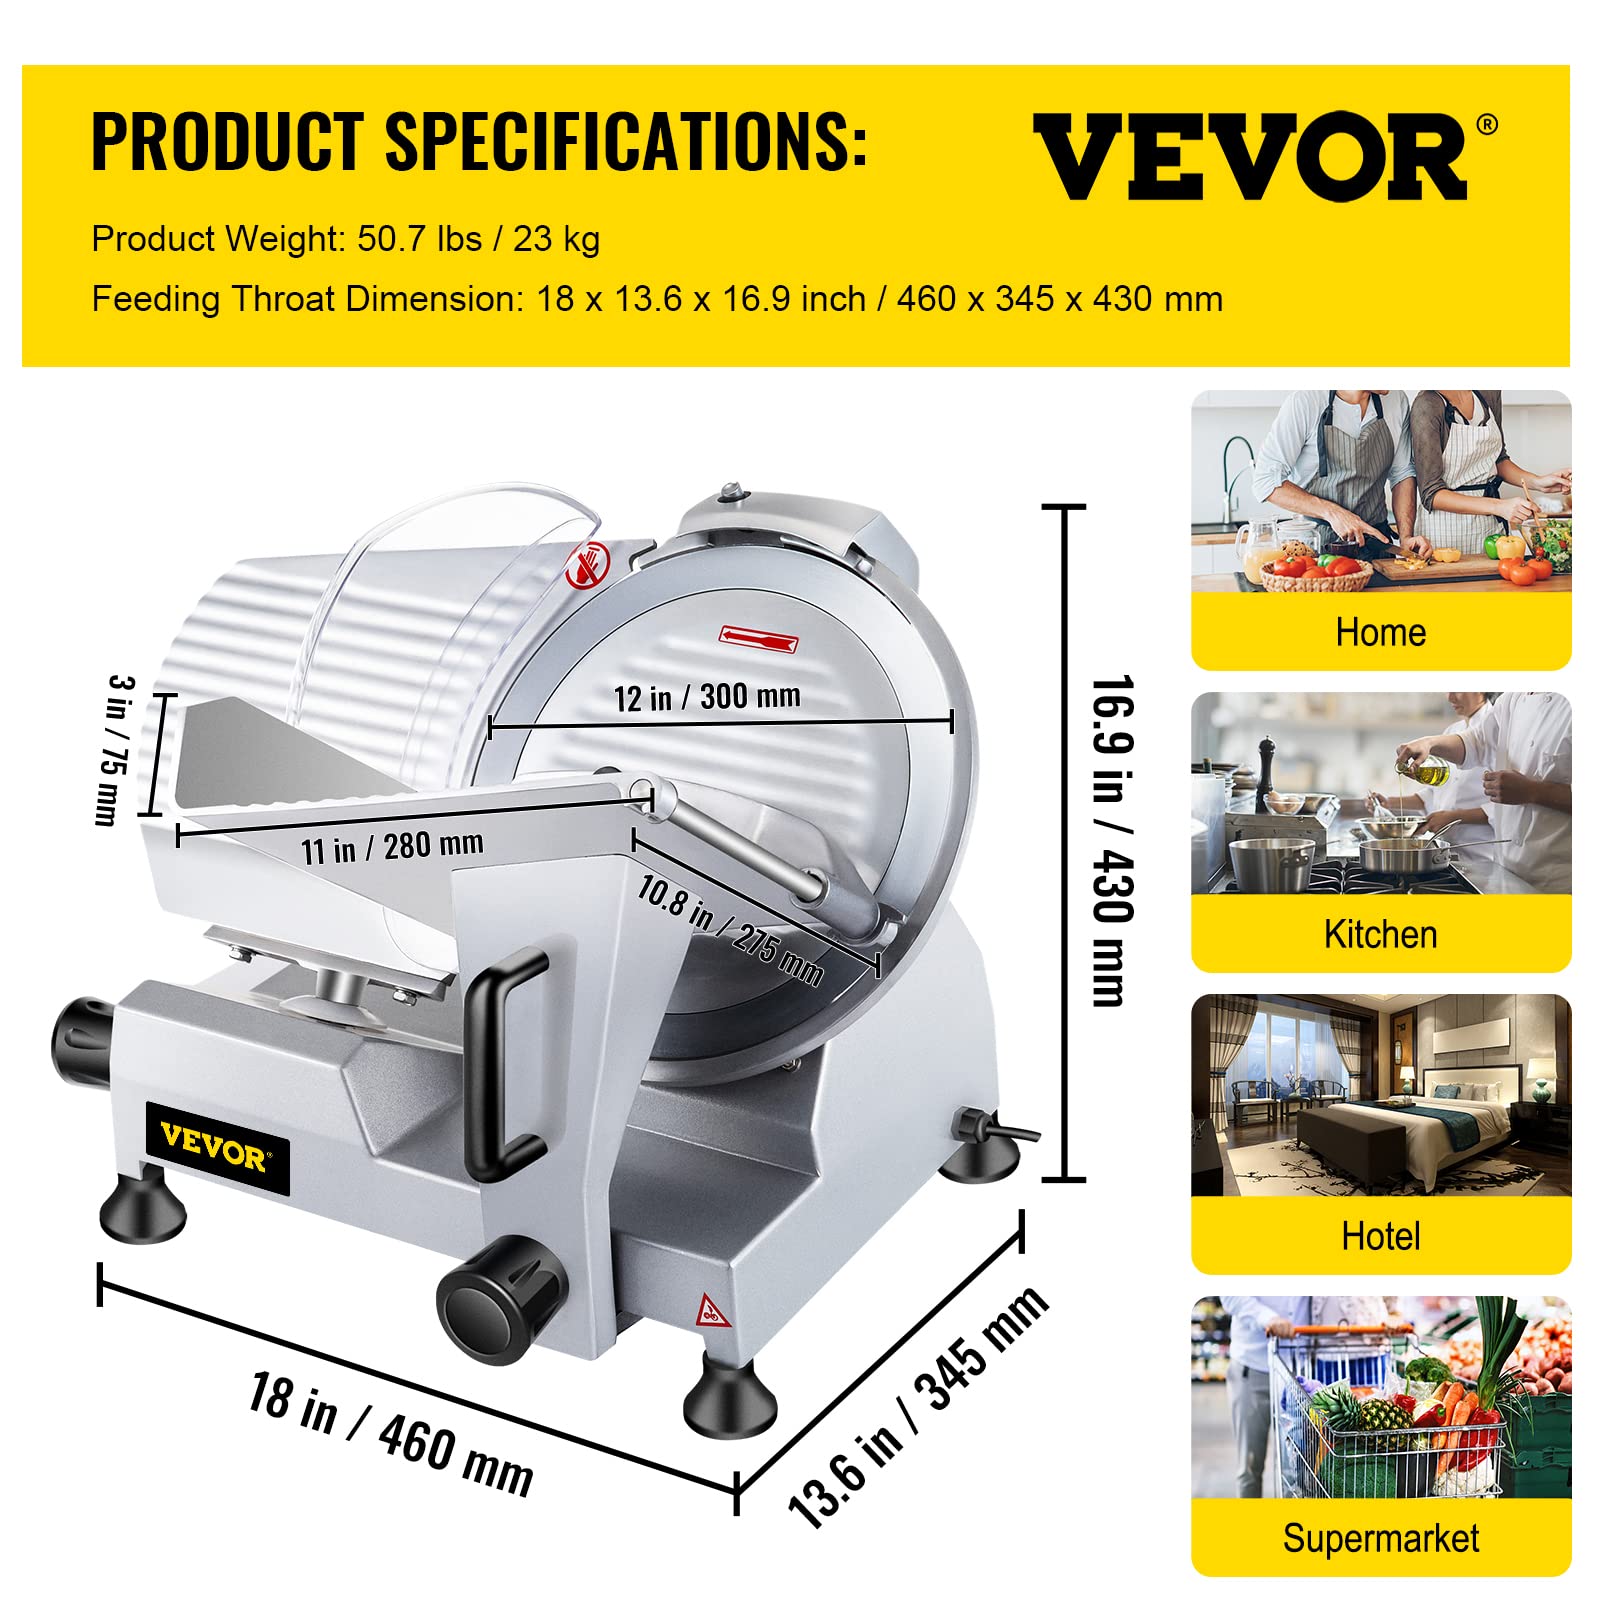 VEVOR Commercial Meat Slicer, 12 inch Electric Food Slicer, Semi-Auto 350W Stainless Steel Deli Meat Slicer, Adjustable Thickness for Meat,Cheese,Veggies Ham Fruit